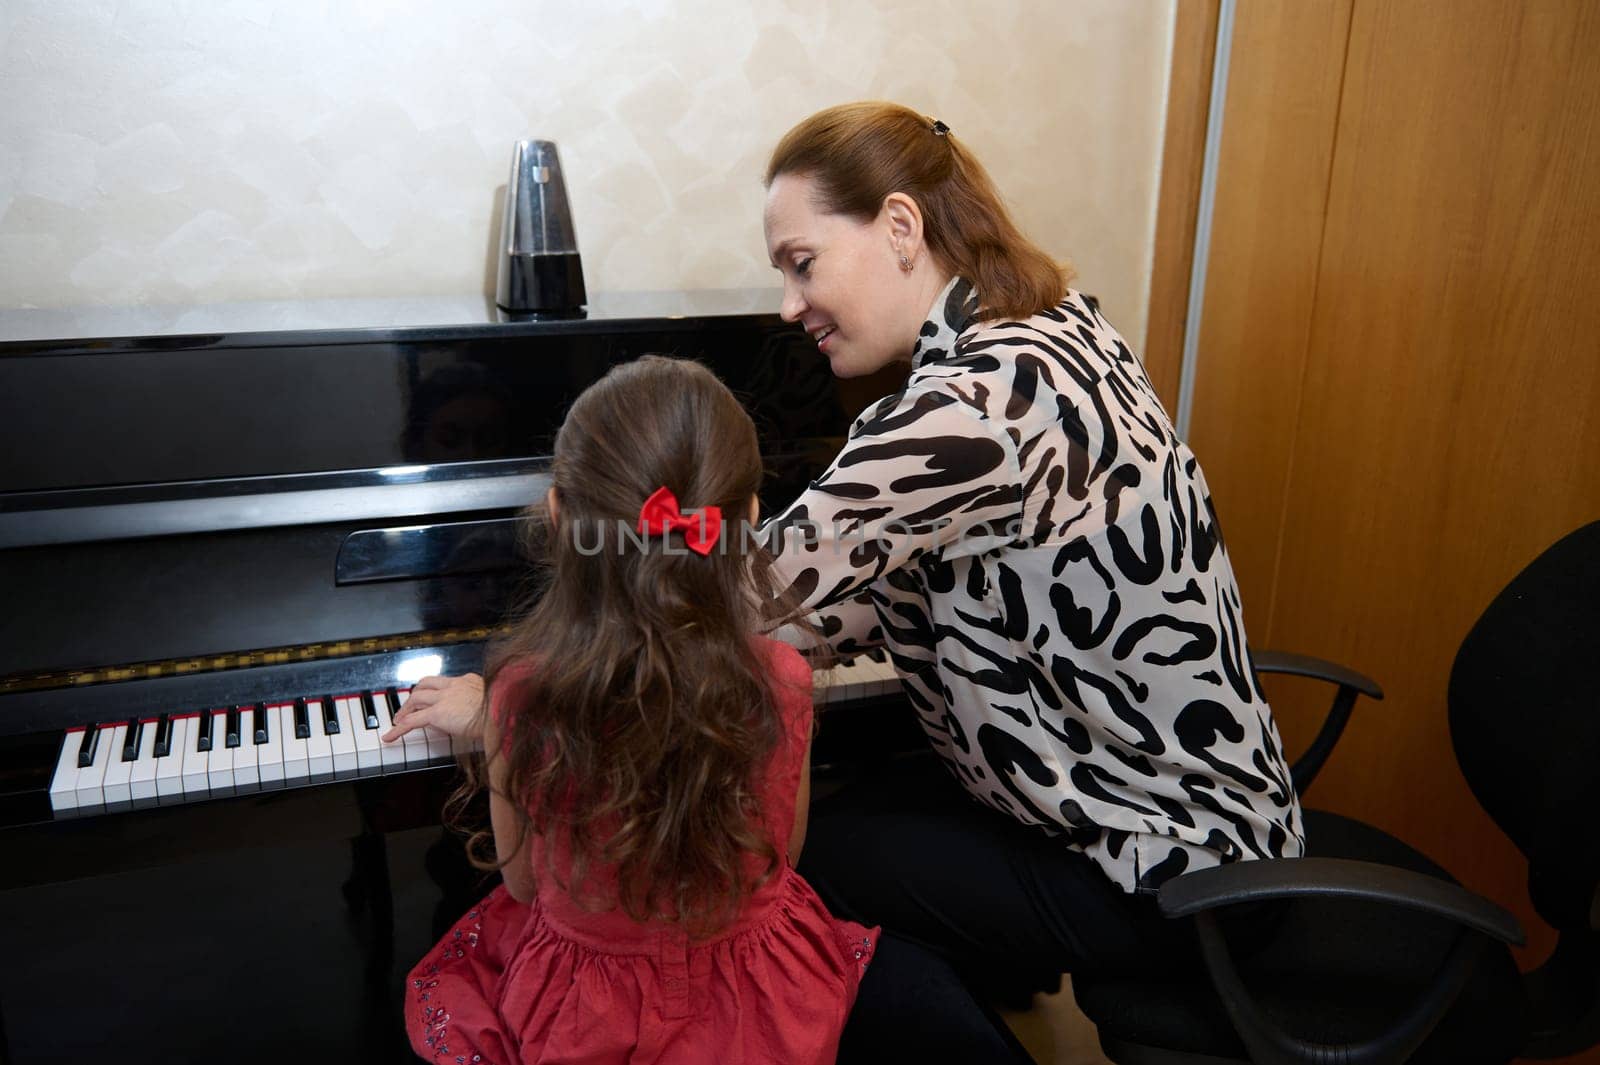 Inspired happy woman pianist, music teacher performing melody on piano forte, explaining piano lesson to a little girl, sitting nearby on a stool. Musical education and talent development in progress